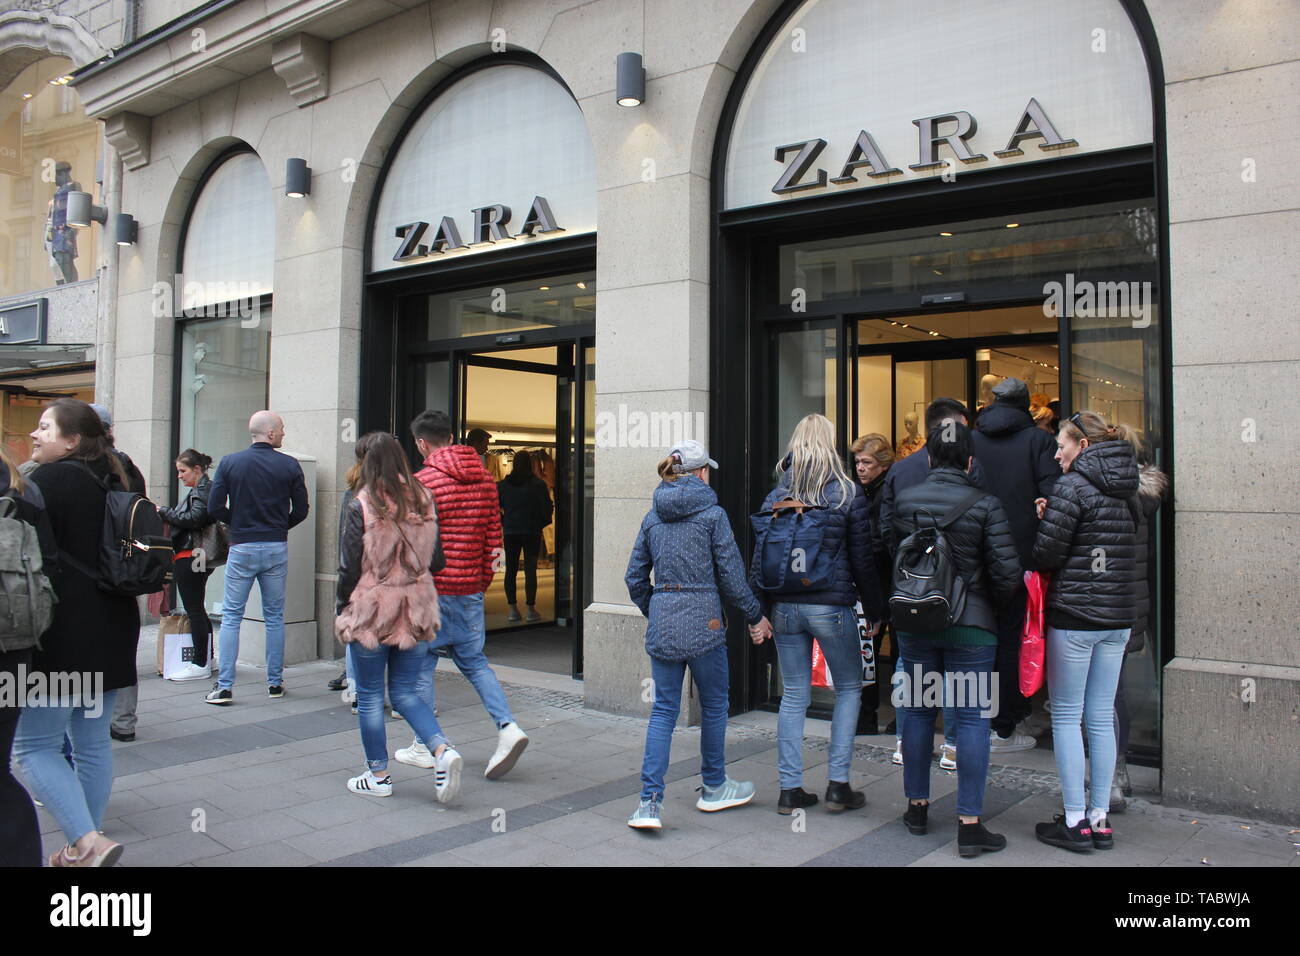 Zara Logo Shopping Street High Resolution Stock Photography and Images -  Alamy